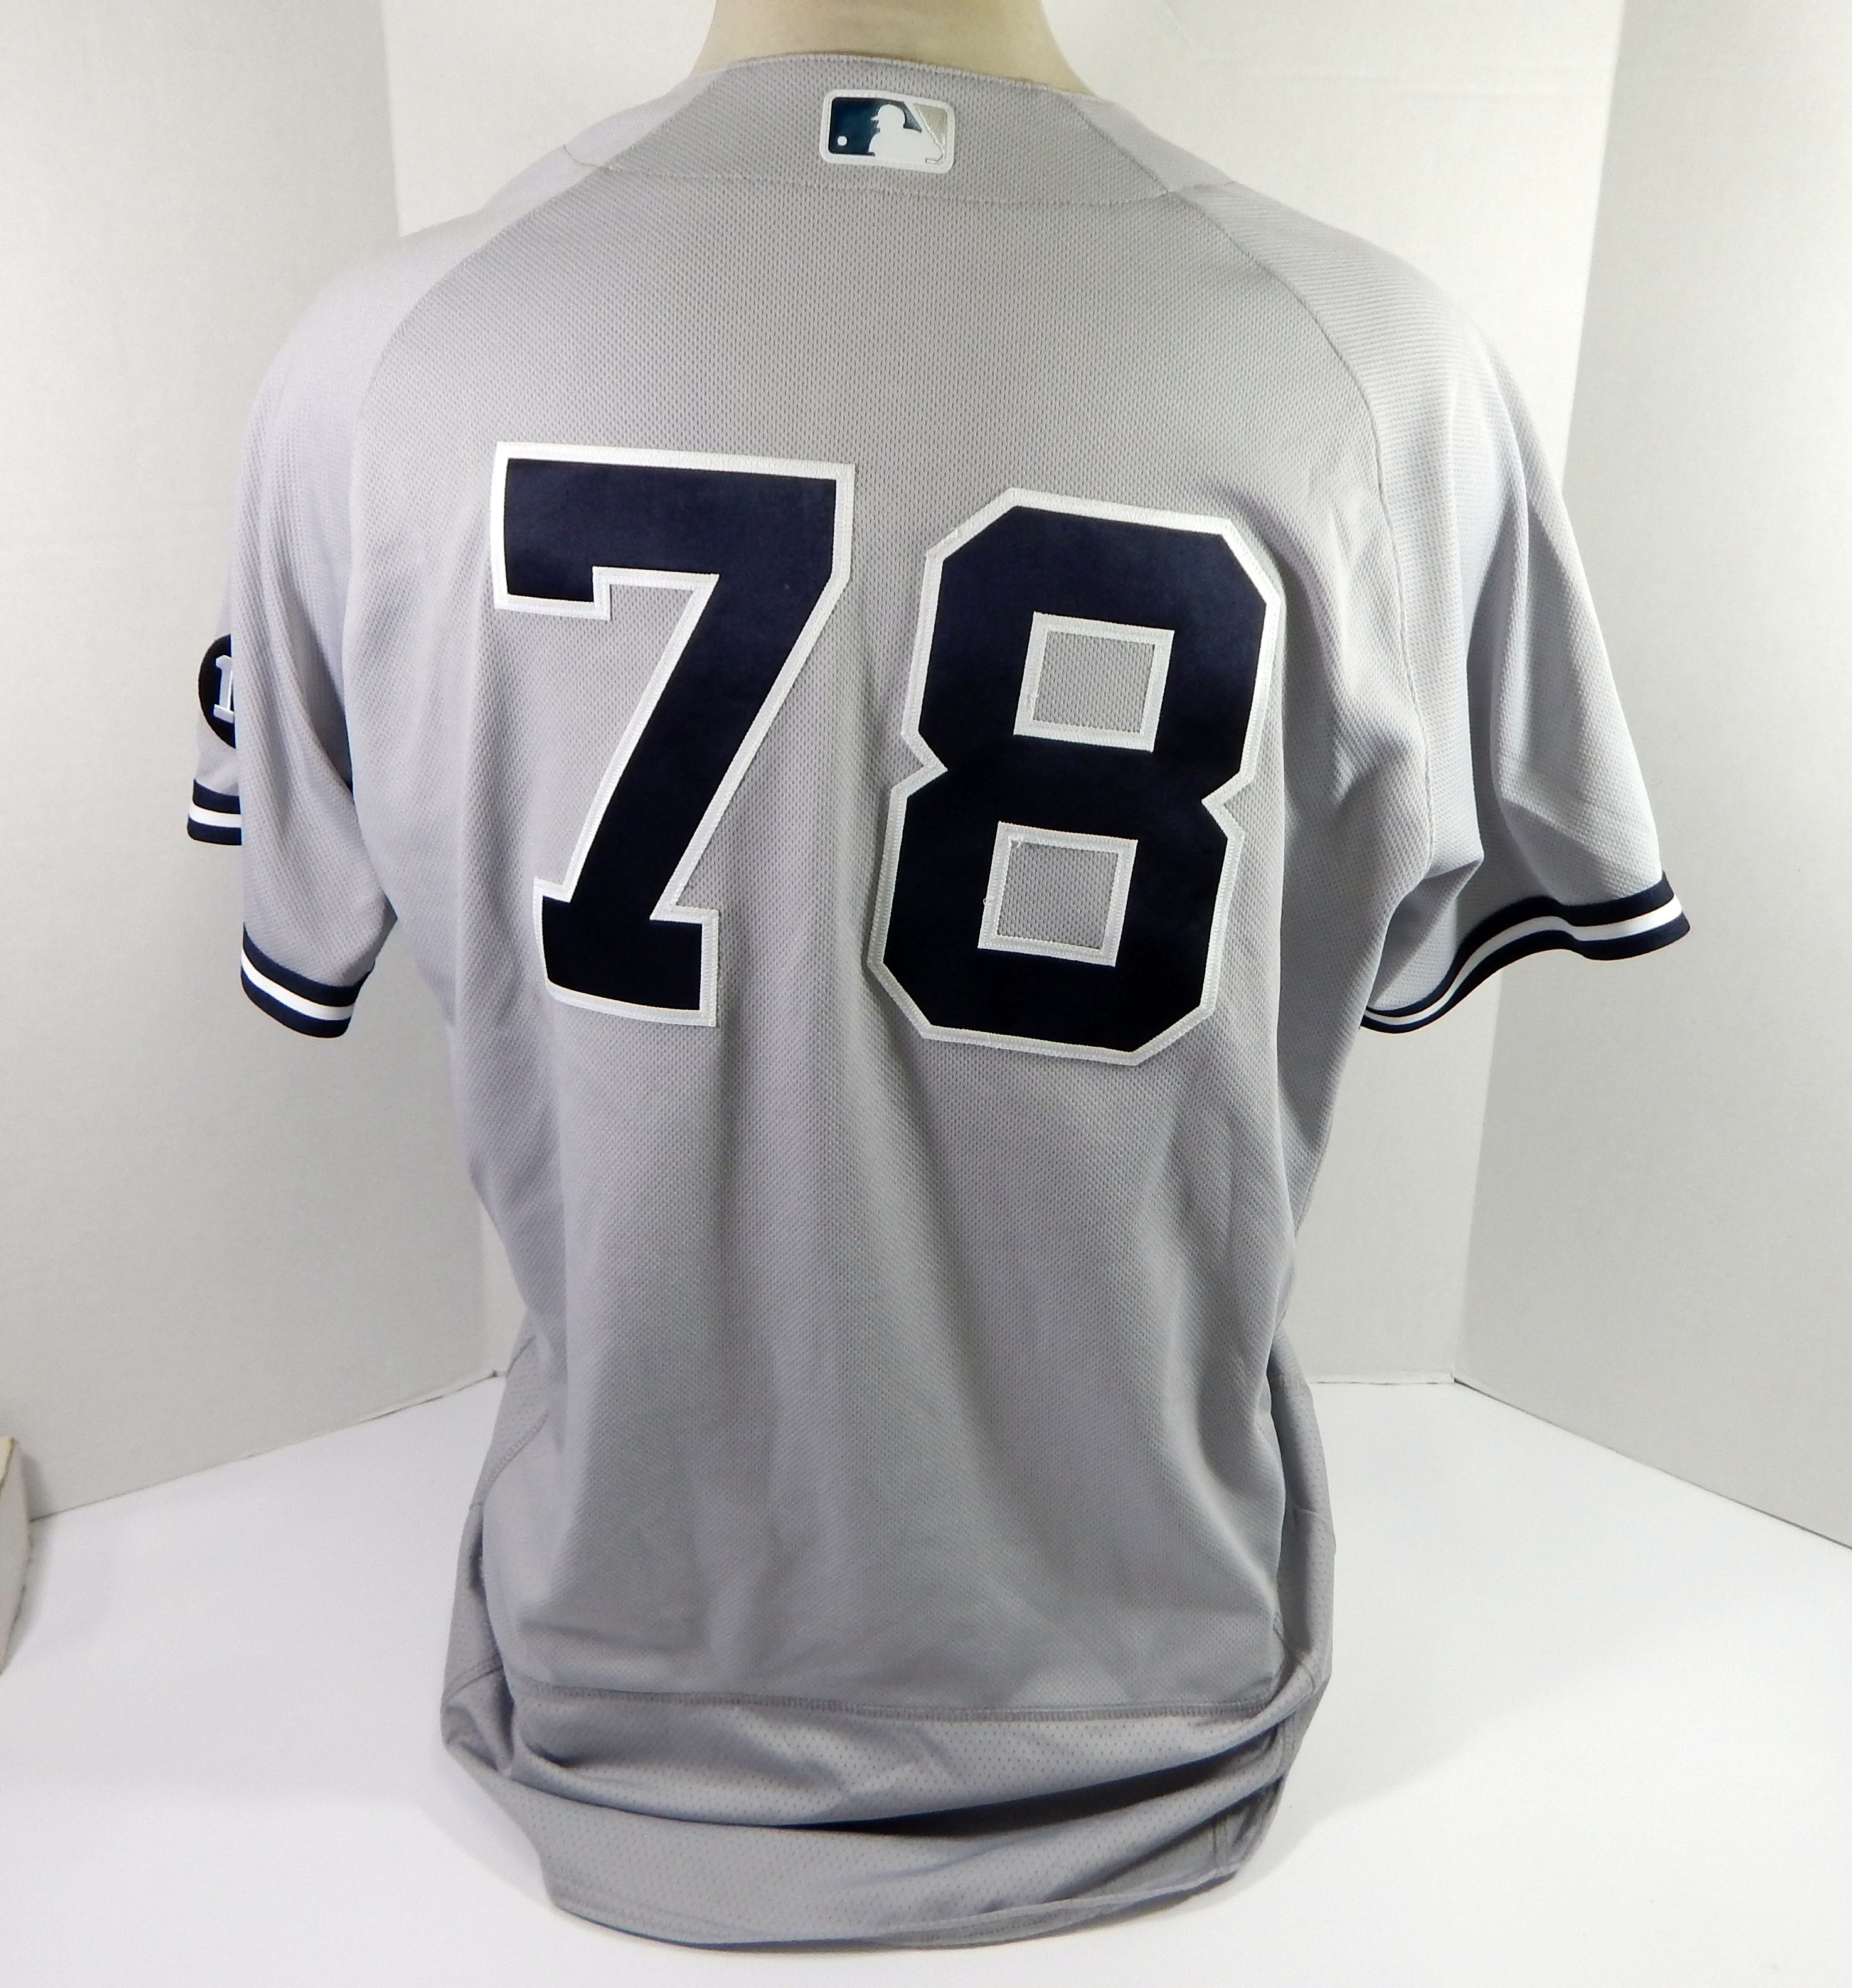 2021 New York Yankees #78 Game Issued Grey Jersey 16th Patch 46 DP28896 